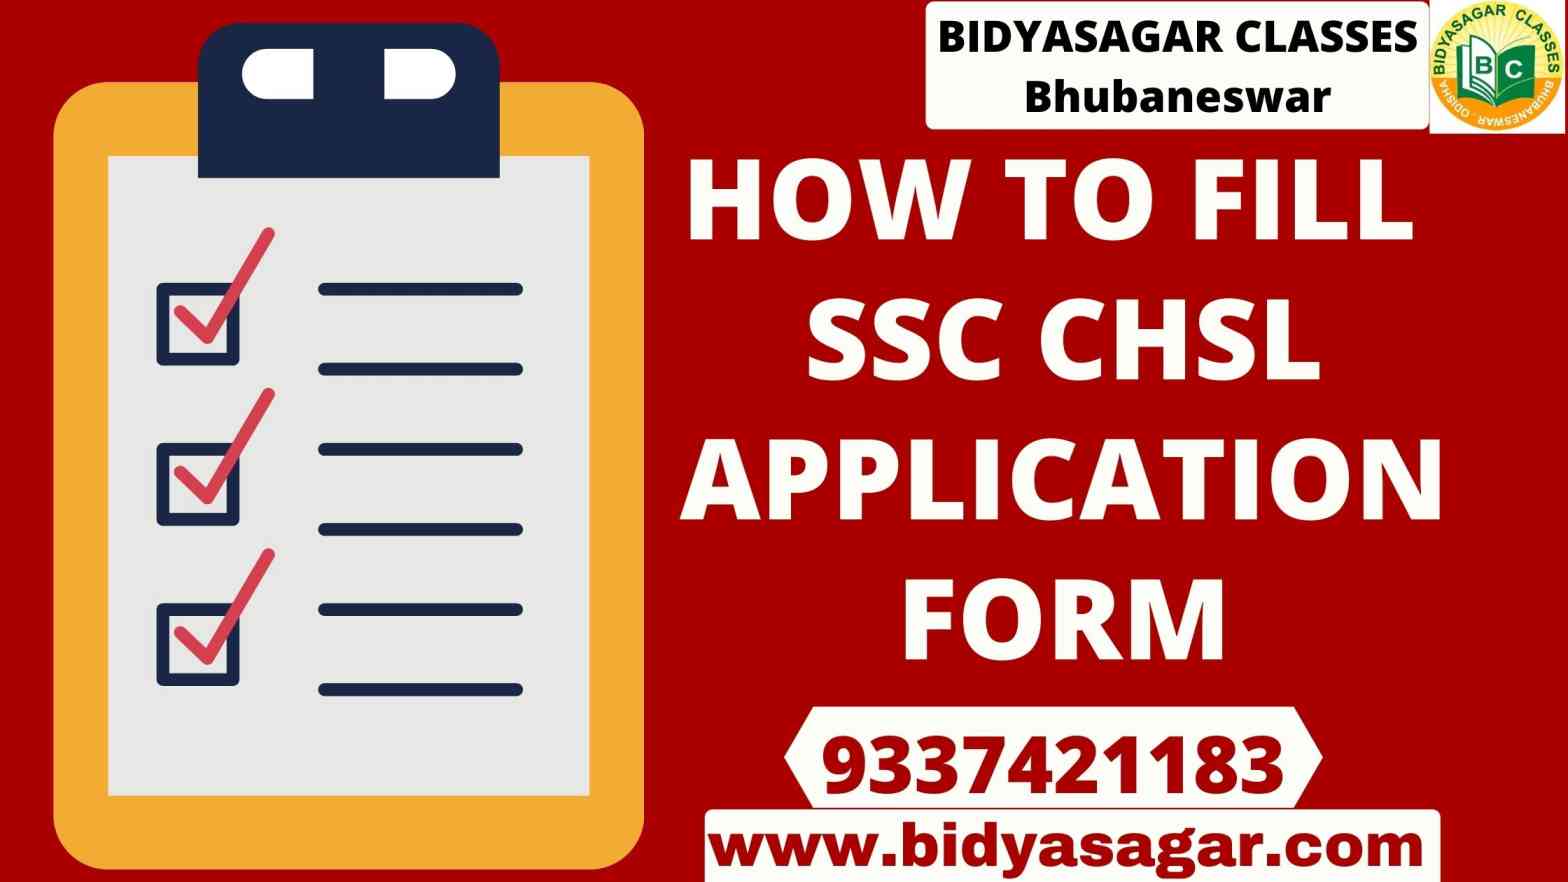 How to Fill SSC CHSL Application Form 2020-21?